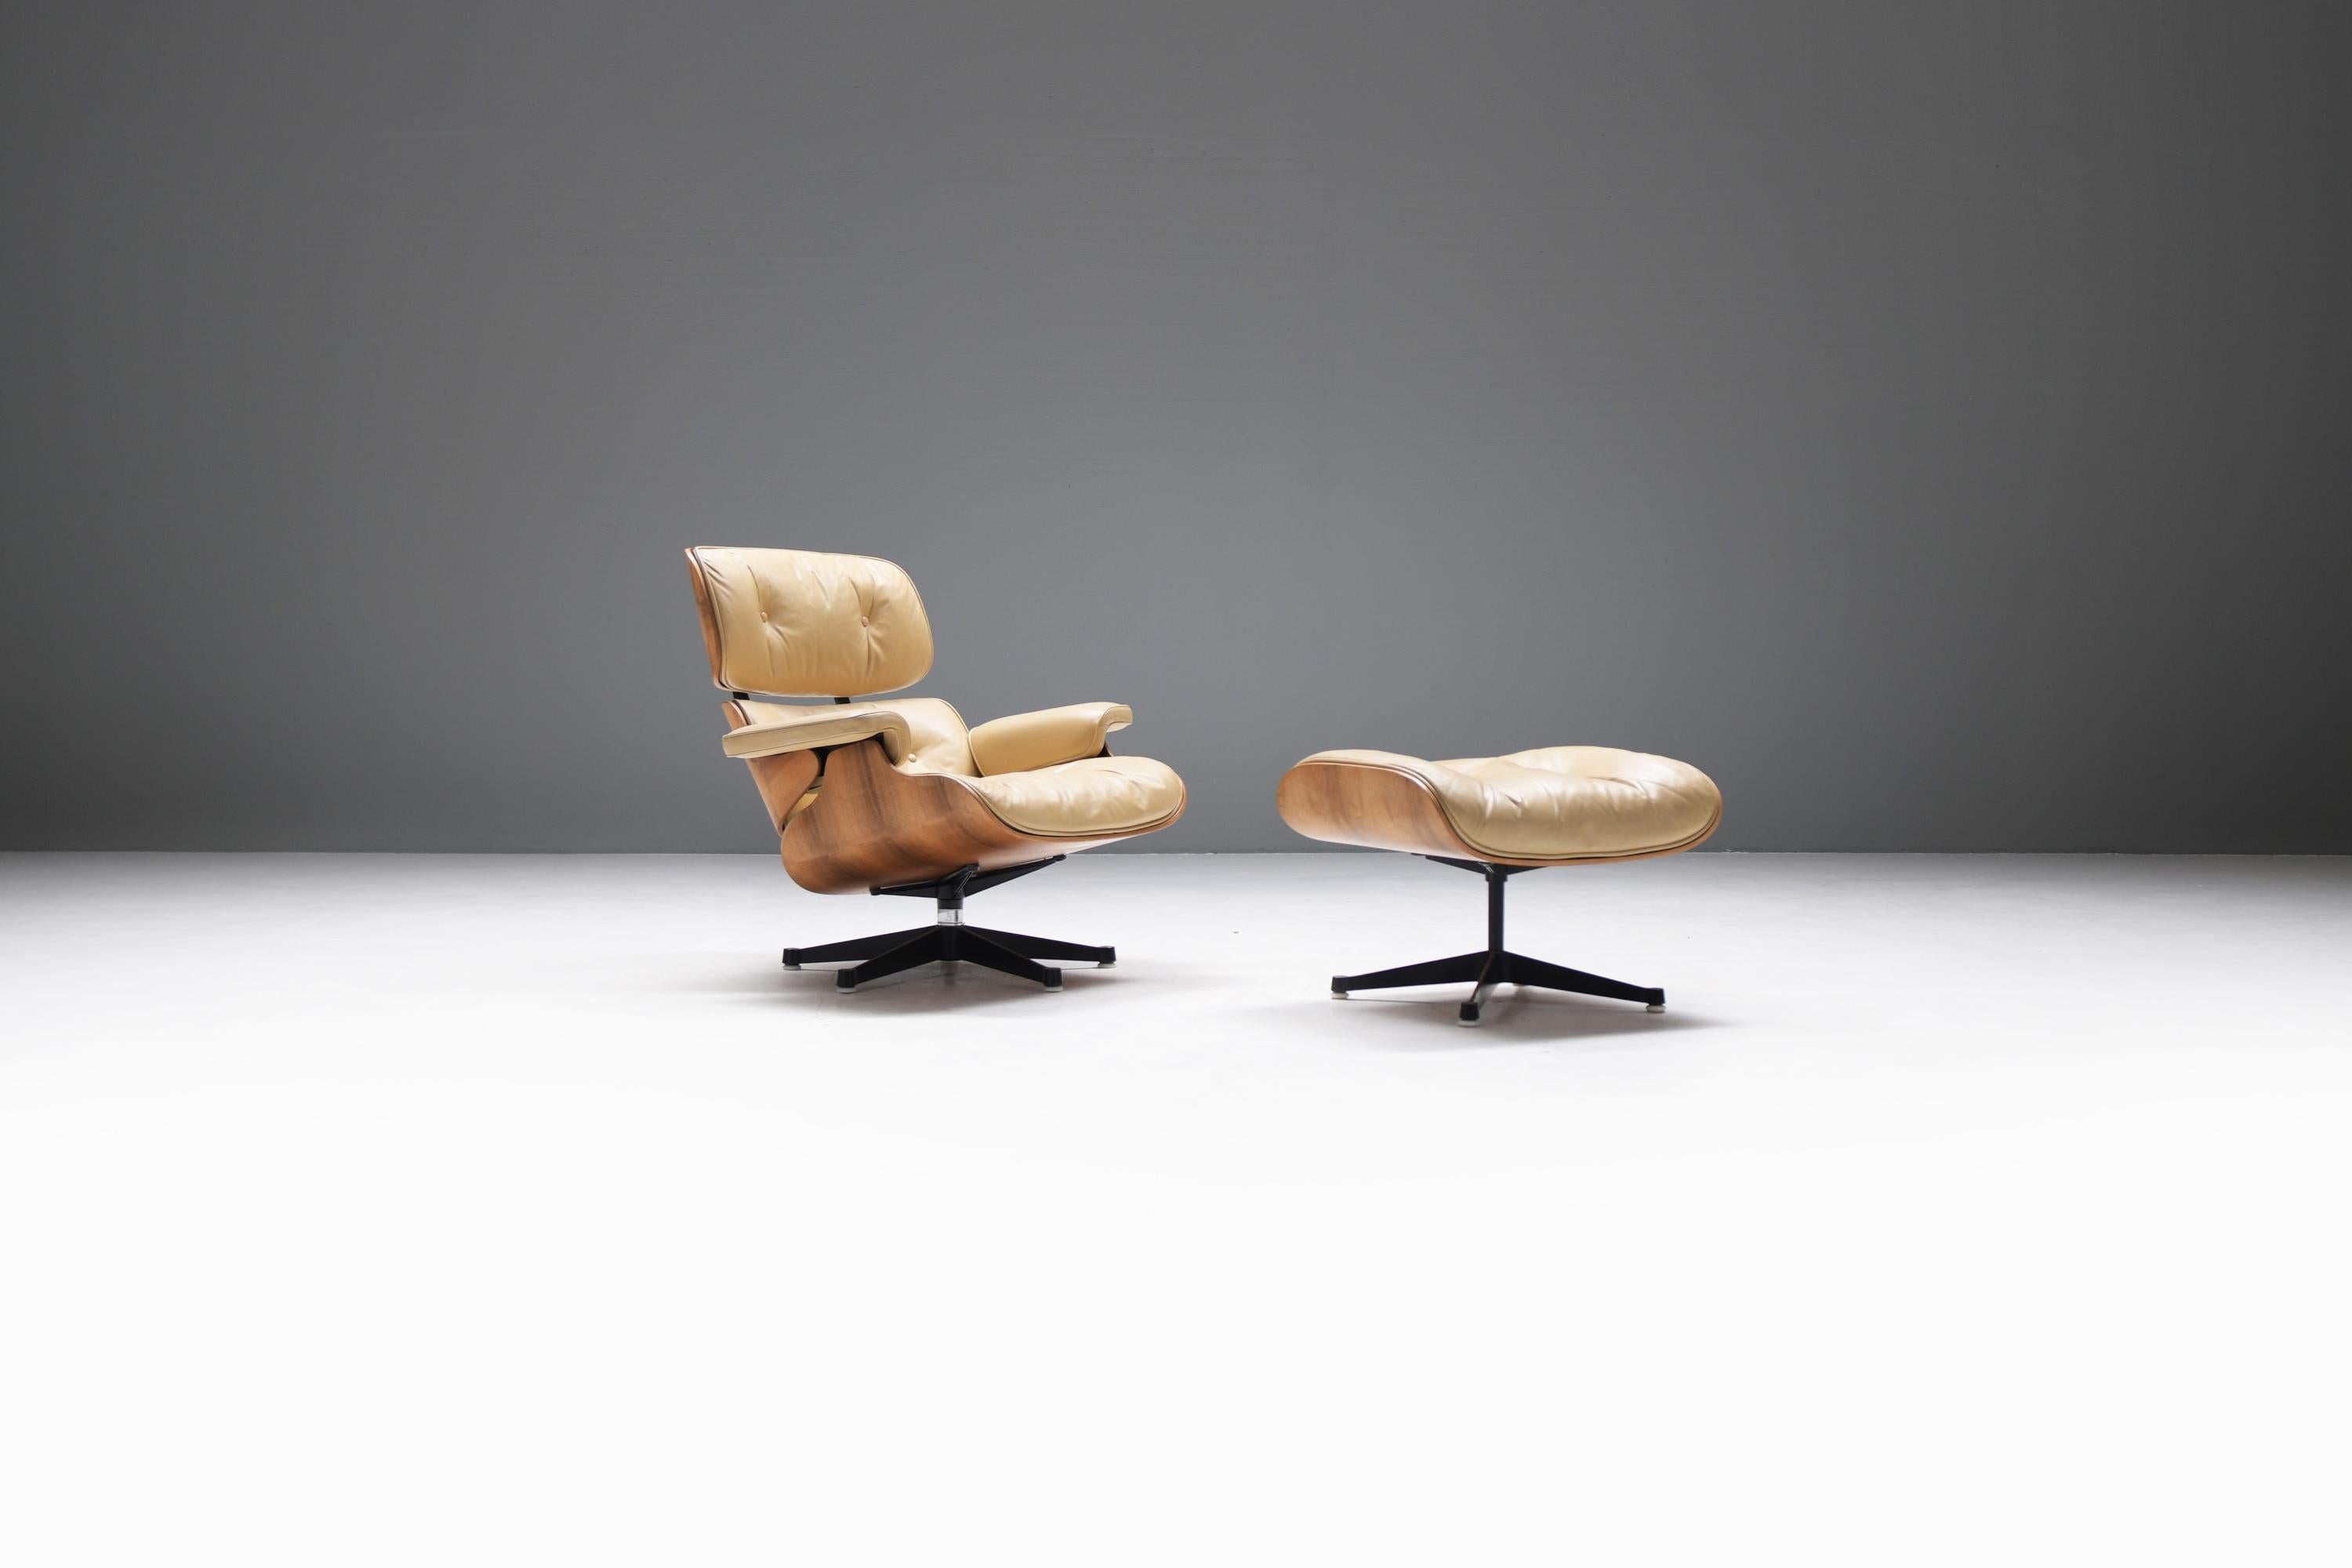 Exceptional find! Stylish & original early Eames lounge chair & ottoman.  A beautiful and very rare combination : Brazilian rosewood with beige/cream leather.  Still 100% original.  Collector item!
Produced between 1972 and 1989 by Mobilier